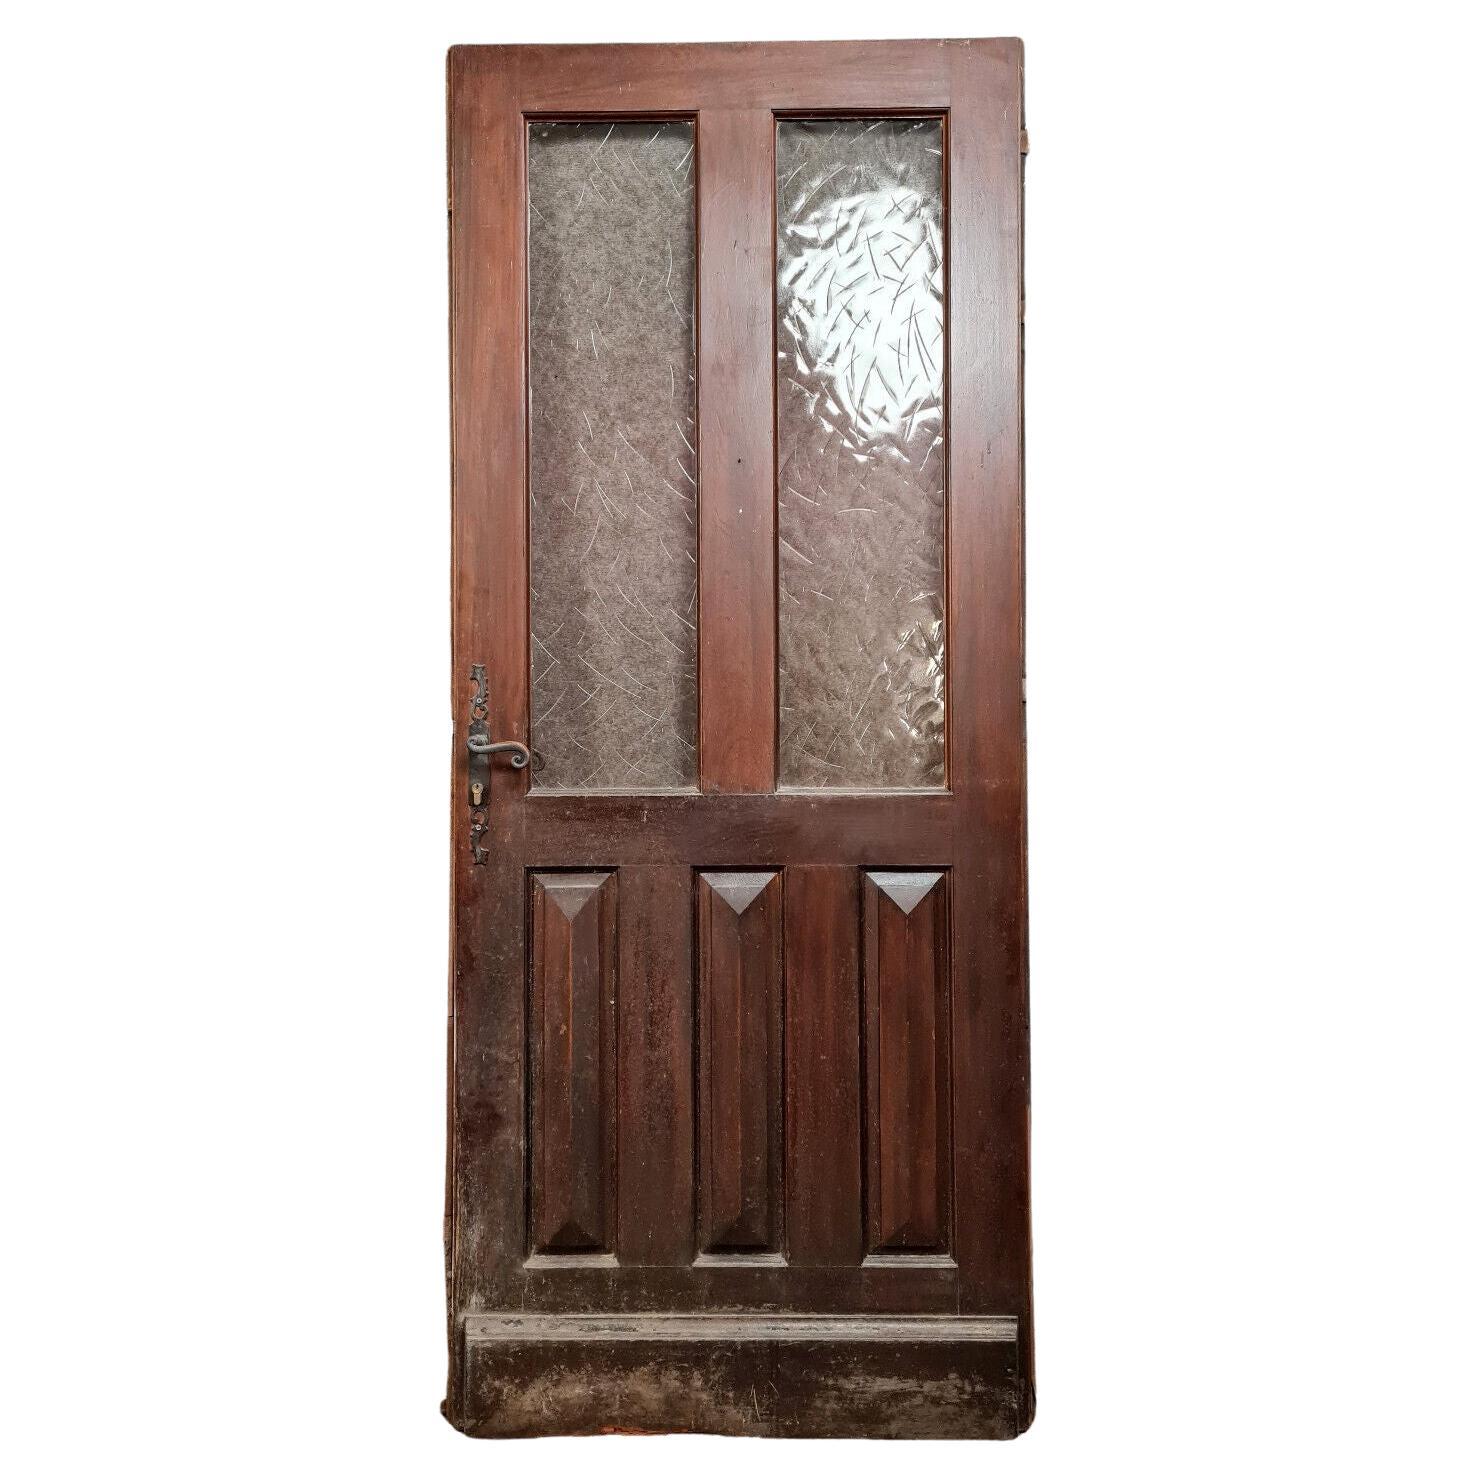 Beautiful Art Deco Solid Wood Door from the 1930s-1940s (Variant A) -1X51 For Sale